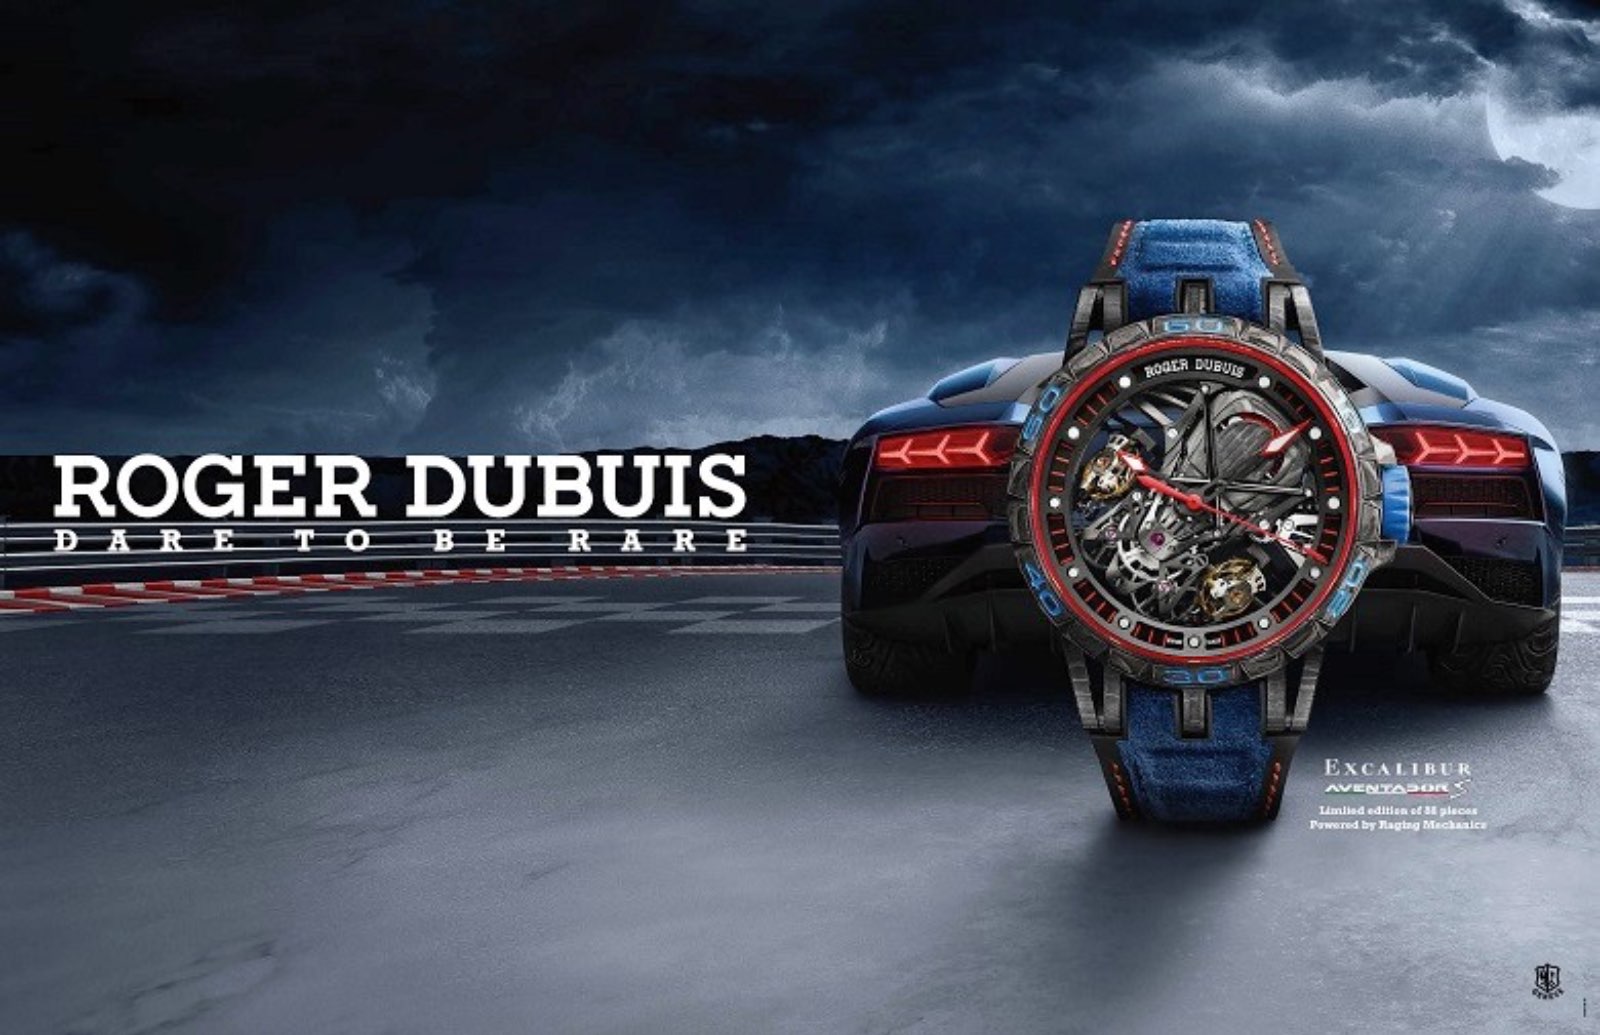 Roger Dubuis, watch